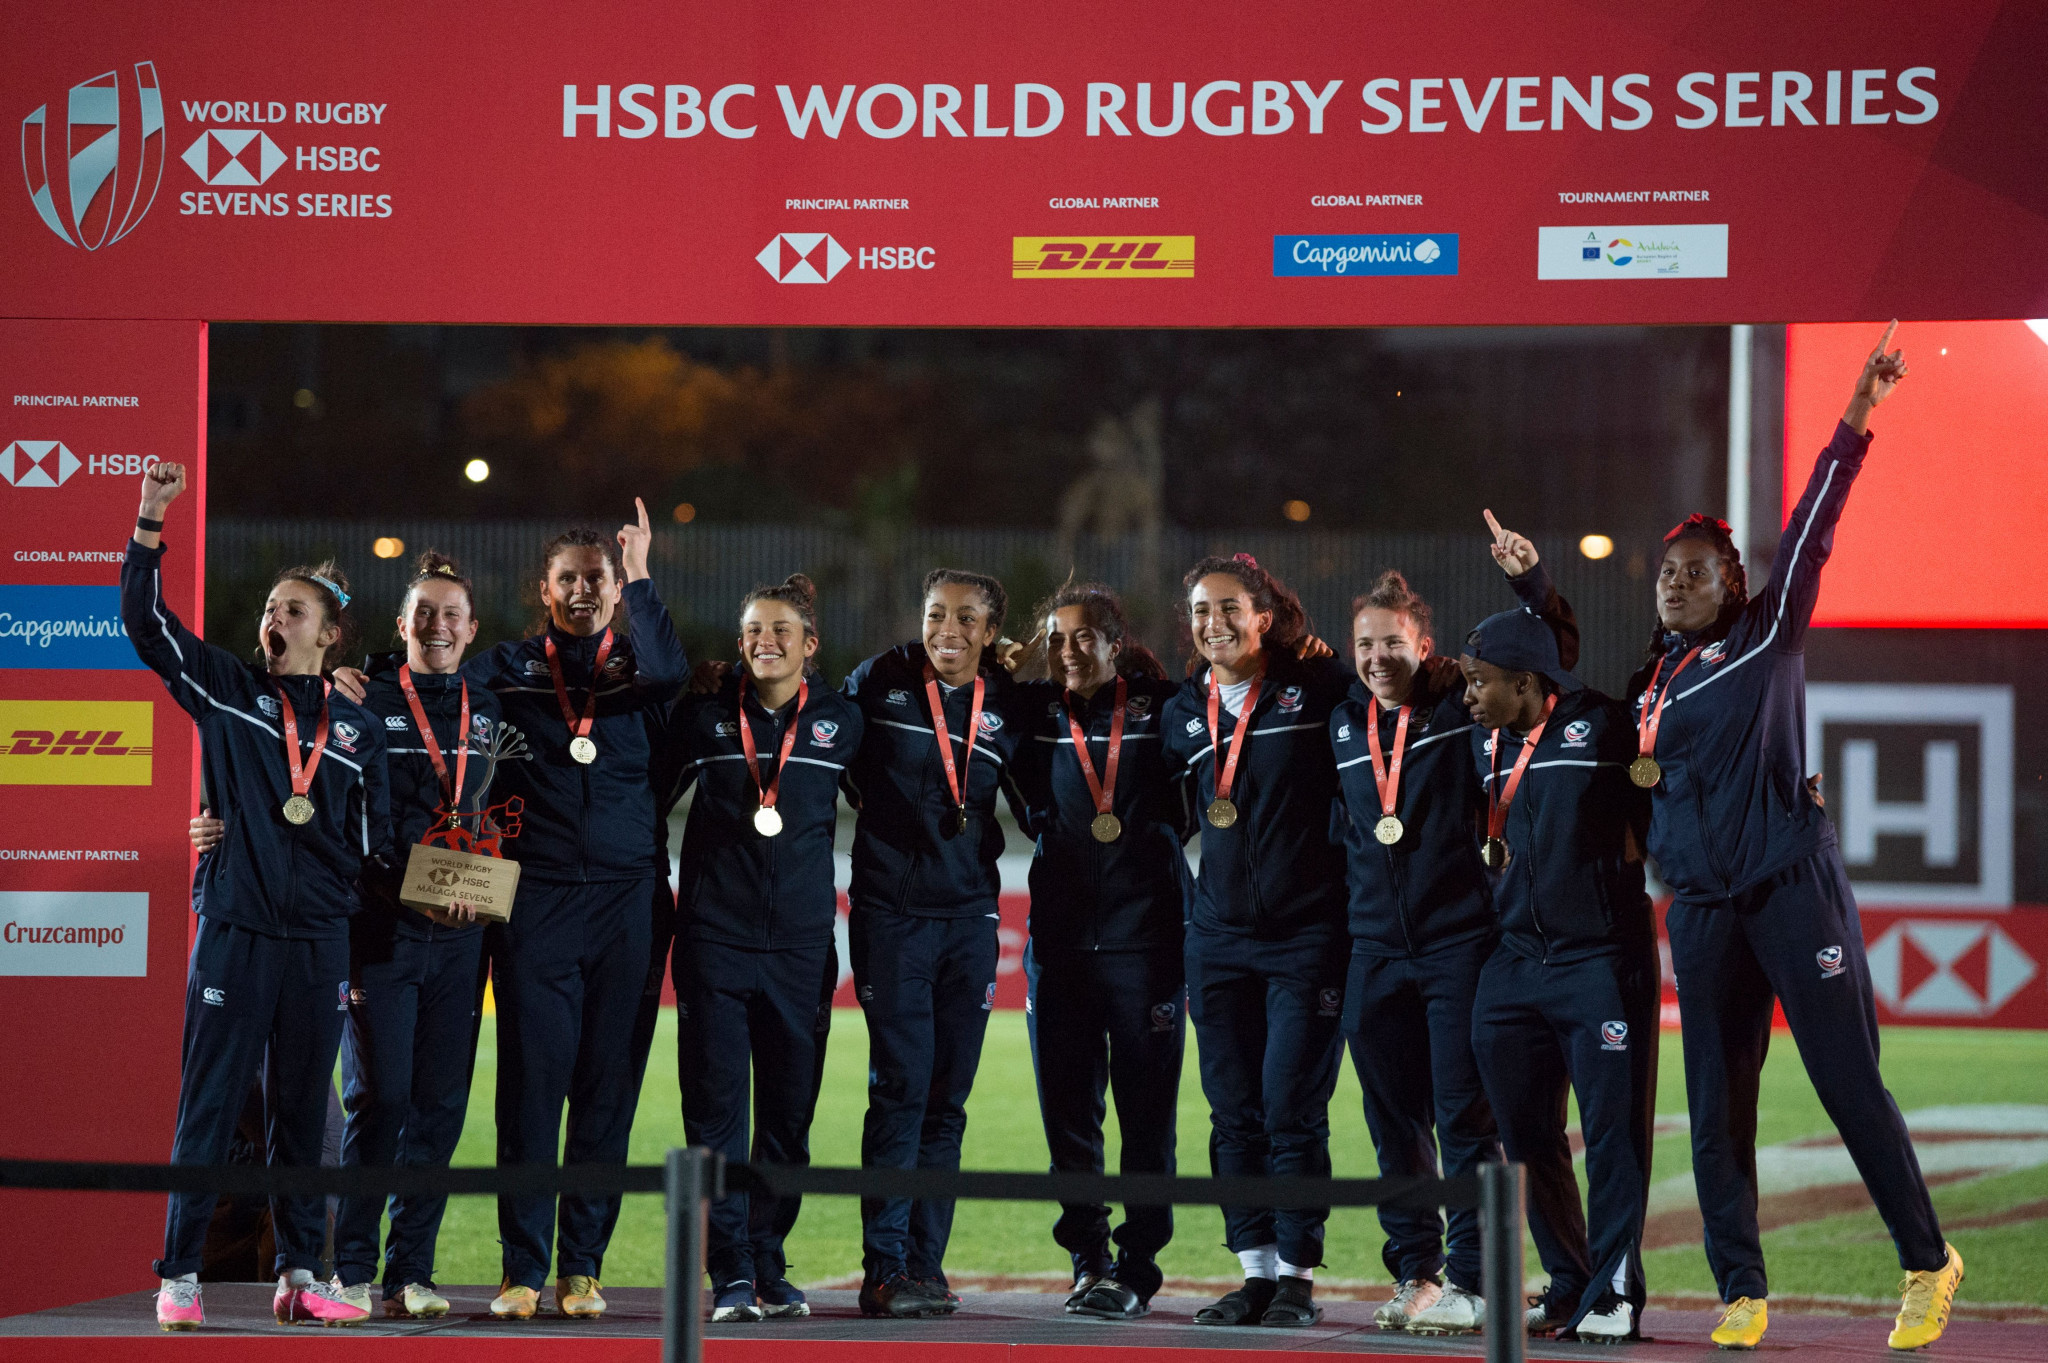 After their victory in Malaga, the United States started the Women's World Rugby Sevens Series tournament in Seville with wins against England and Canada ©Getty Images